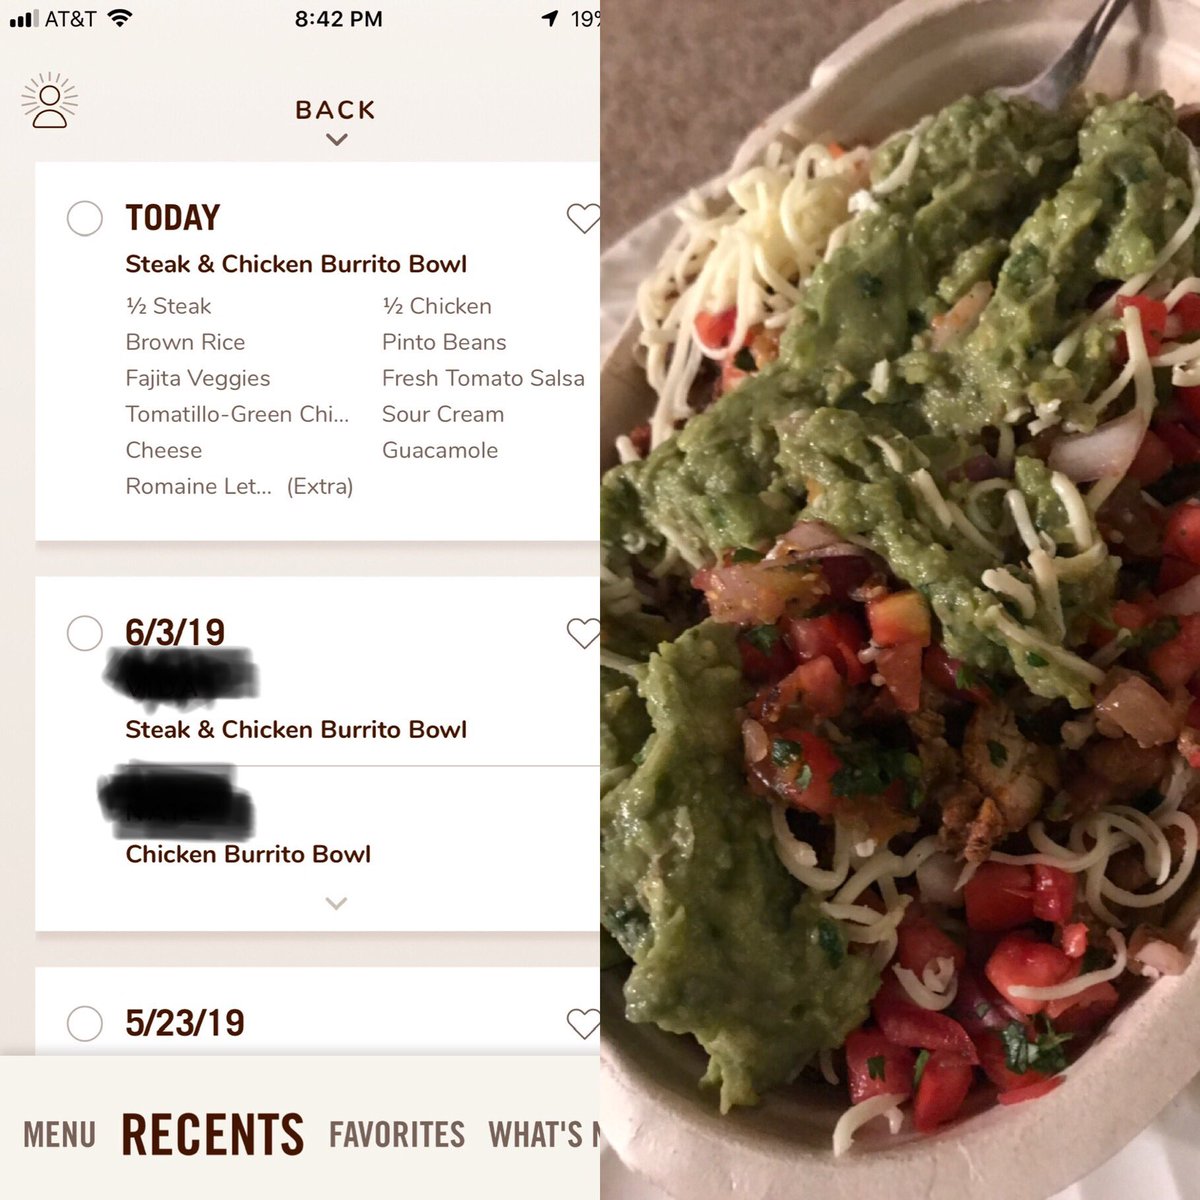 Chipotle If You Reached Out To Us At T Co Xw5wqcg3cj You Should Have Been Contacted Please Dm Us The Email Address You Provided Ty T Co Hgxmfpz4sf